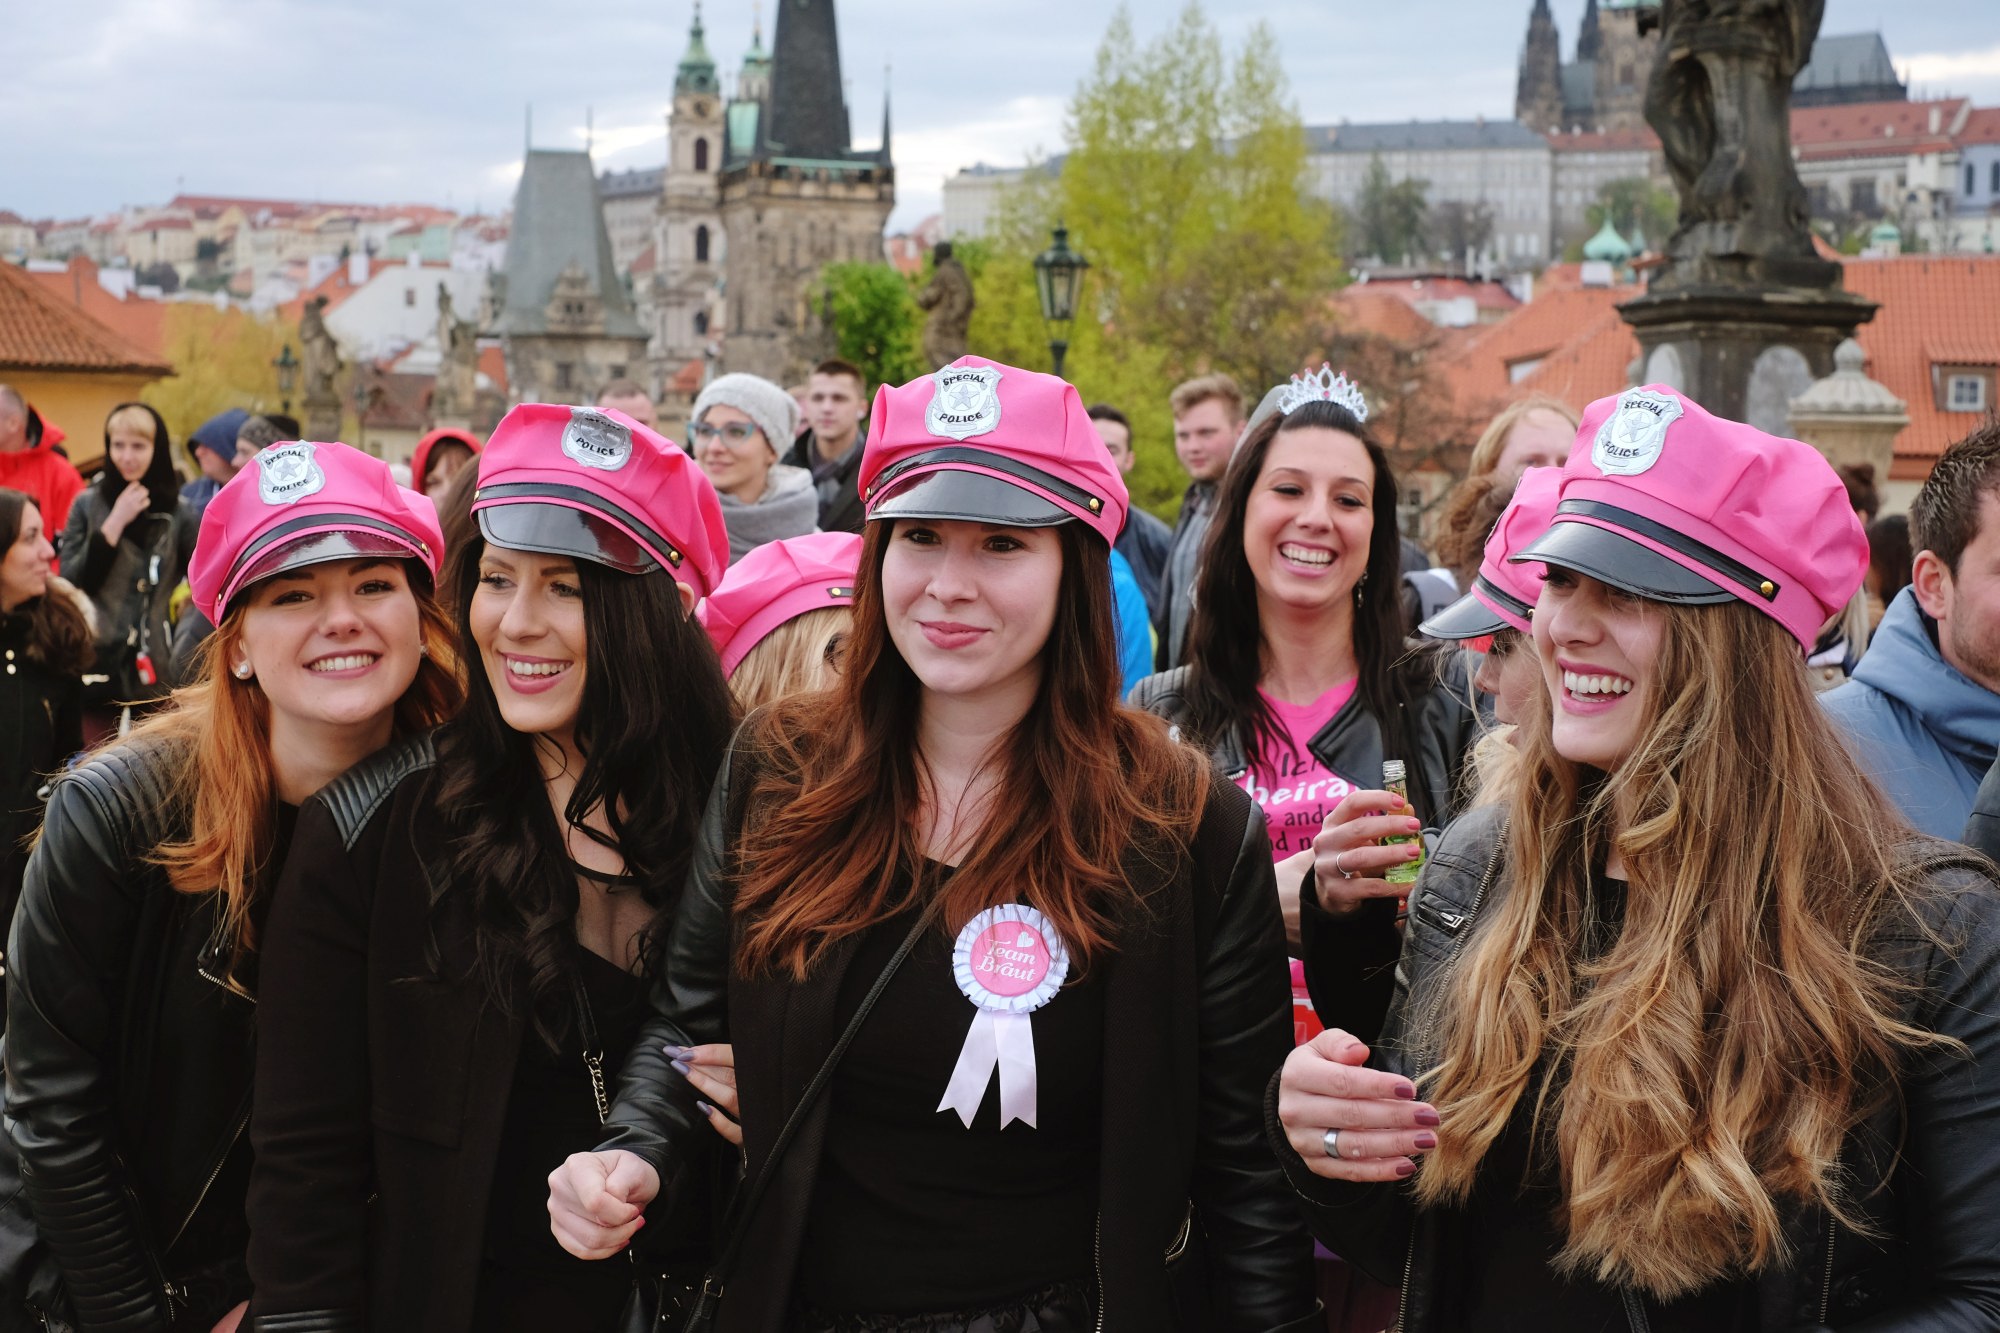 Special Police, Friends of the Bride; hens party in pink police caps on the Charles Bridge in Prague. Travel photography by Kent Johnson.